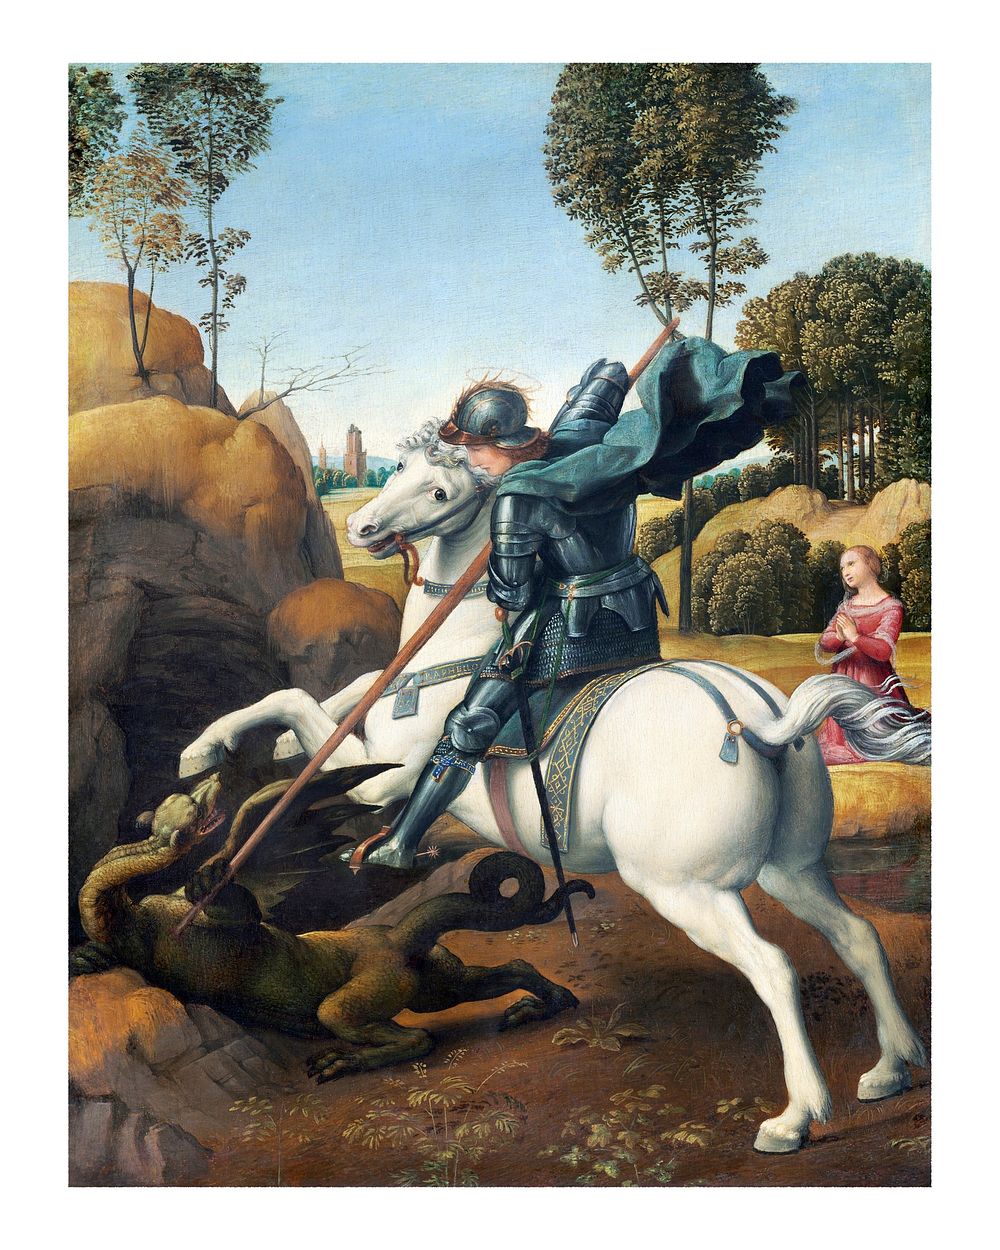 Raphael poster, Saint George and the Dragon famous painting (ca. 1506). Original from National Gallery of Art. Digitally…